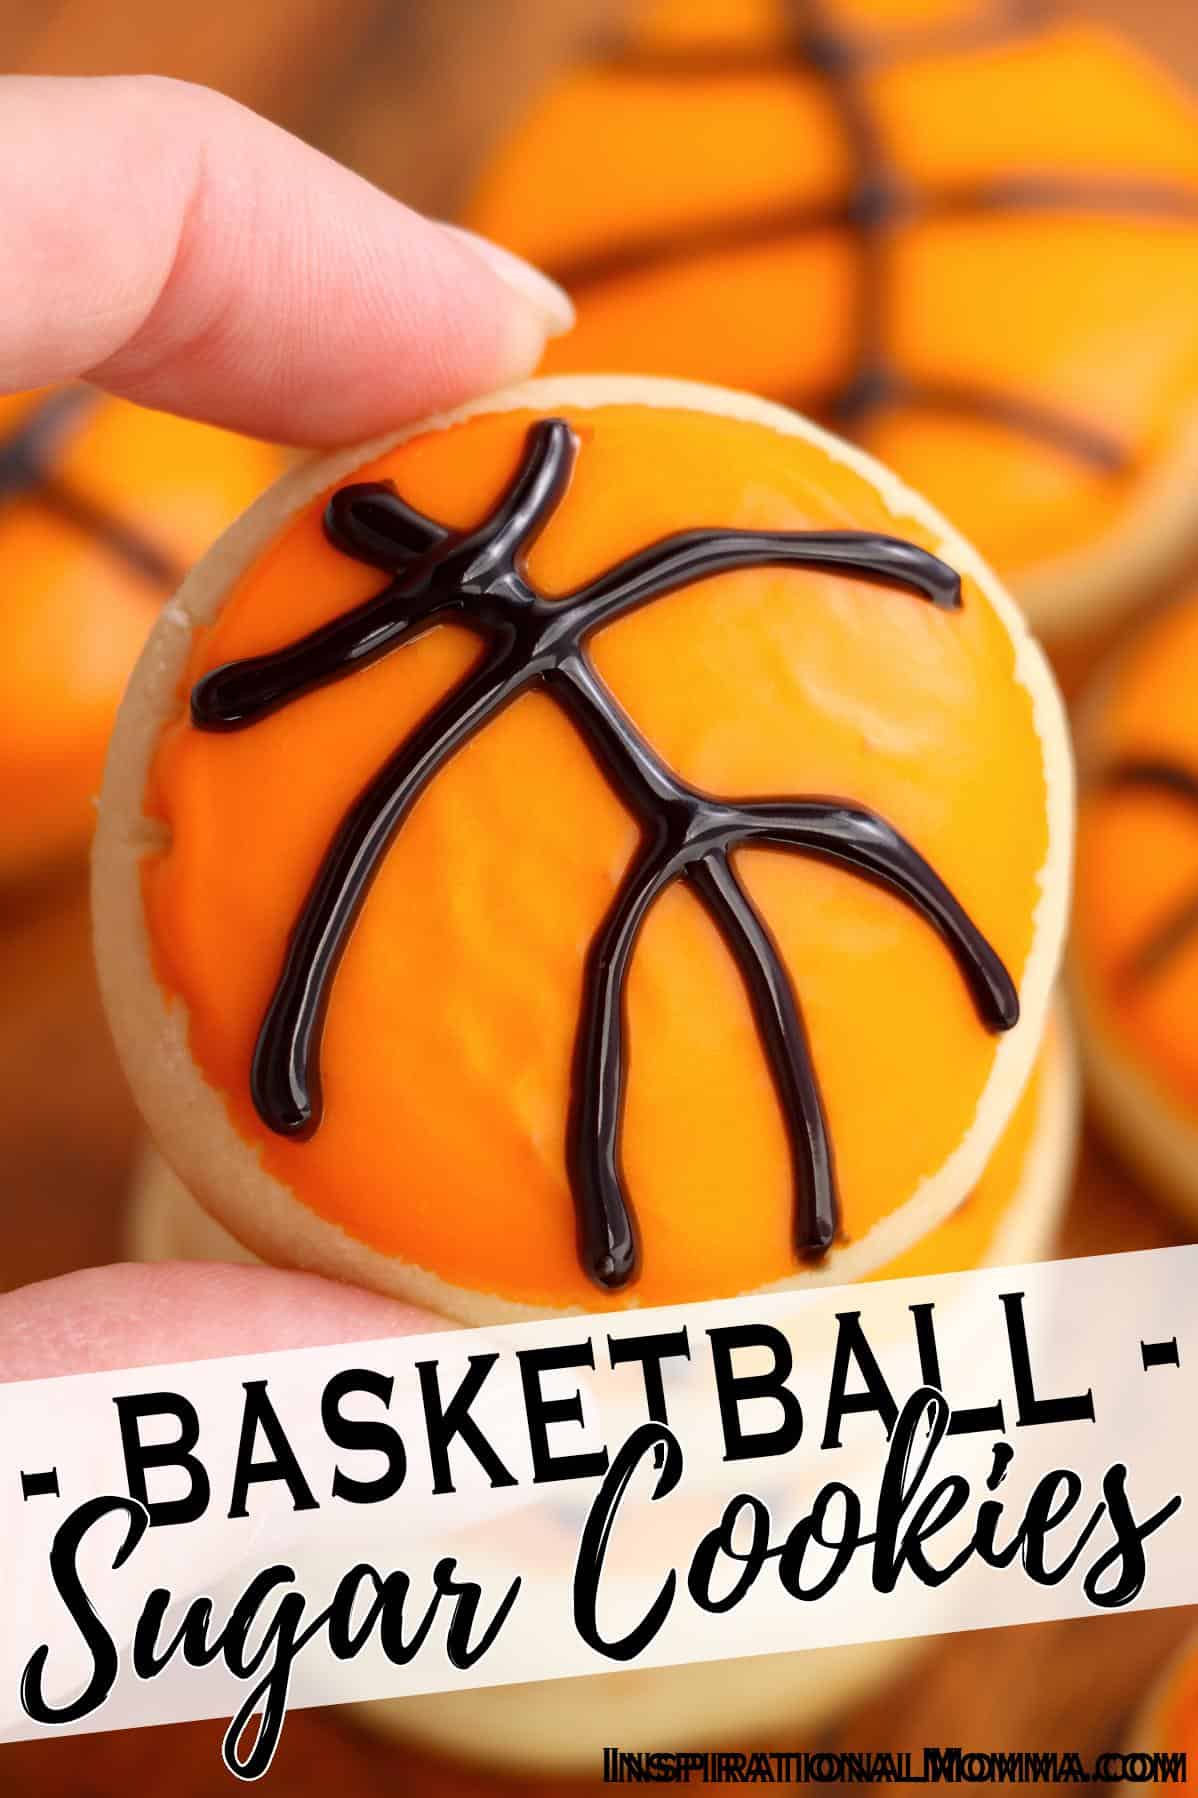  These cookies are a slam dunk no matter the season!